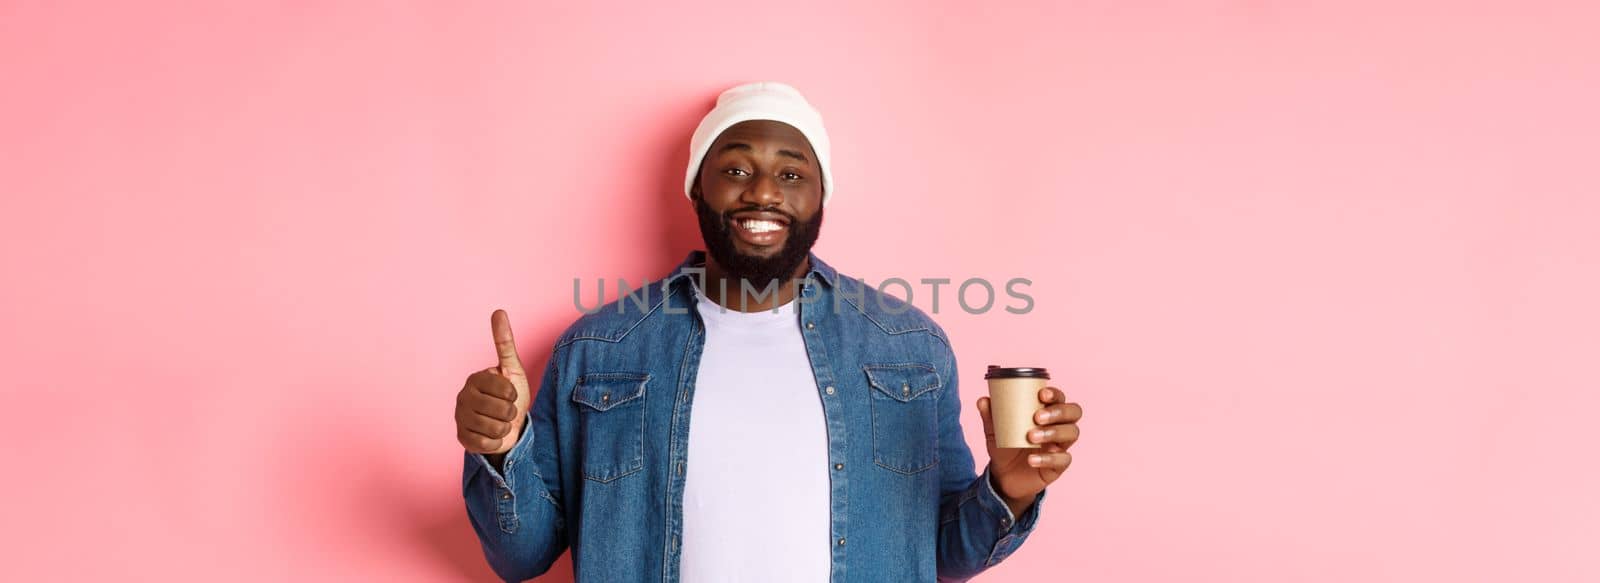 Handsome african-american hipster man showing thumb up, drinking coffee and recommending cafe, standing over pink background.